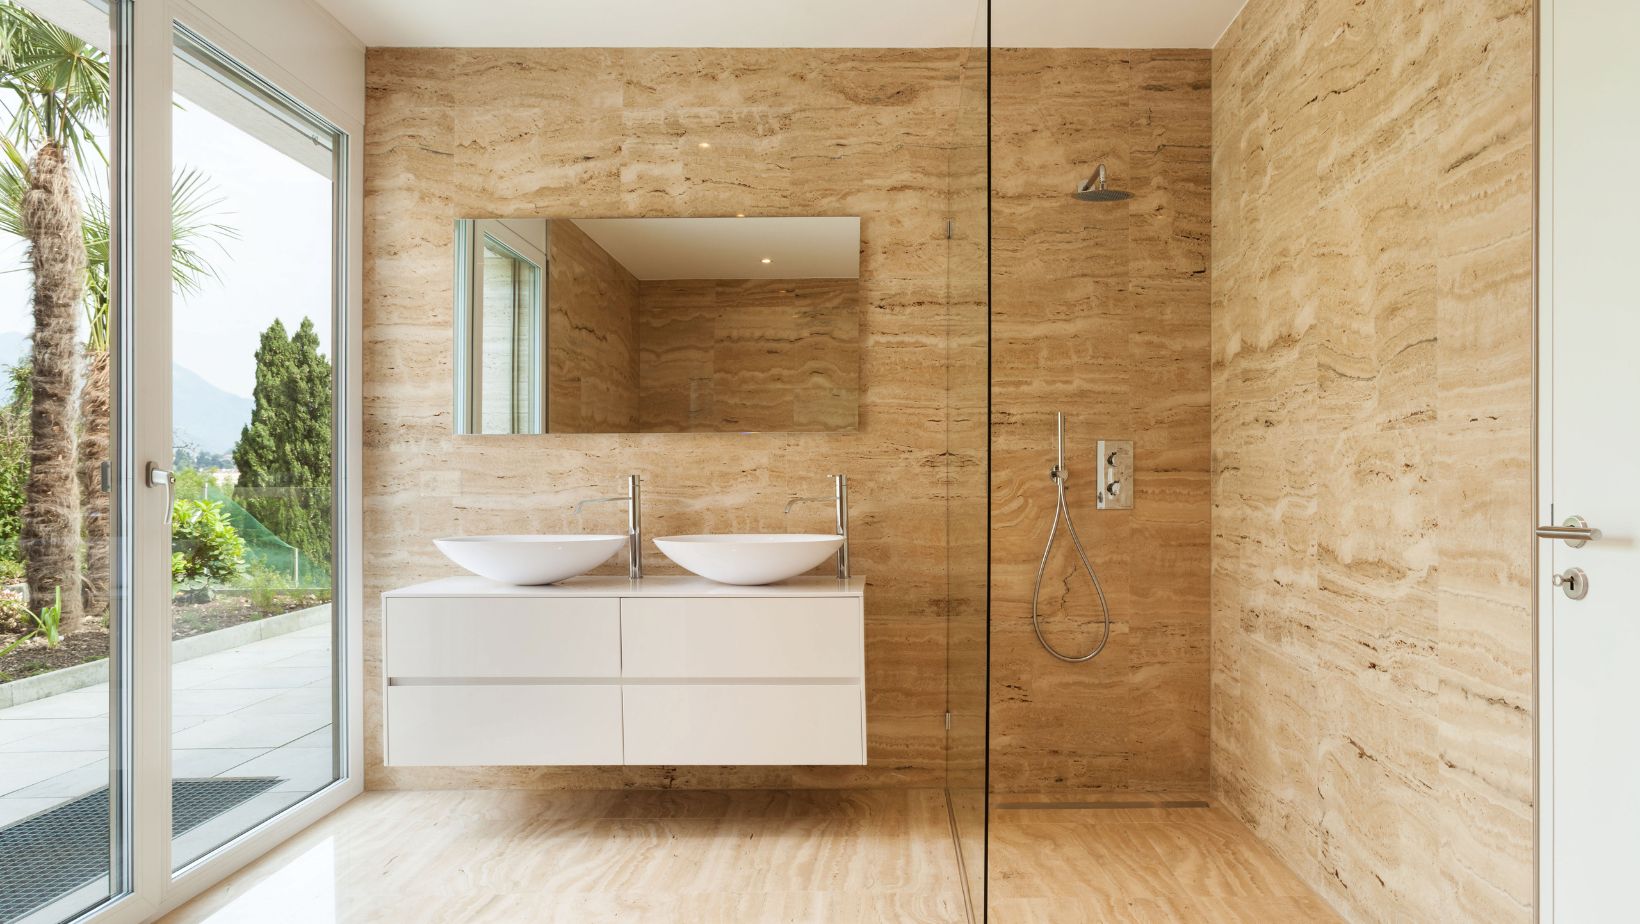 Modern bathroom style with floating cream vessel sink bathroom cabinets and a walk-in shower